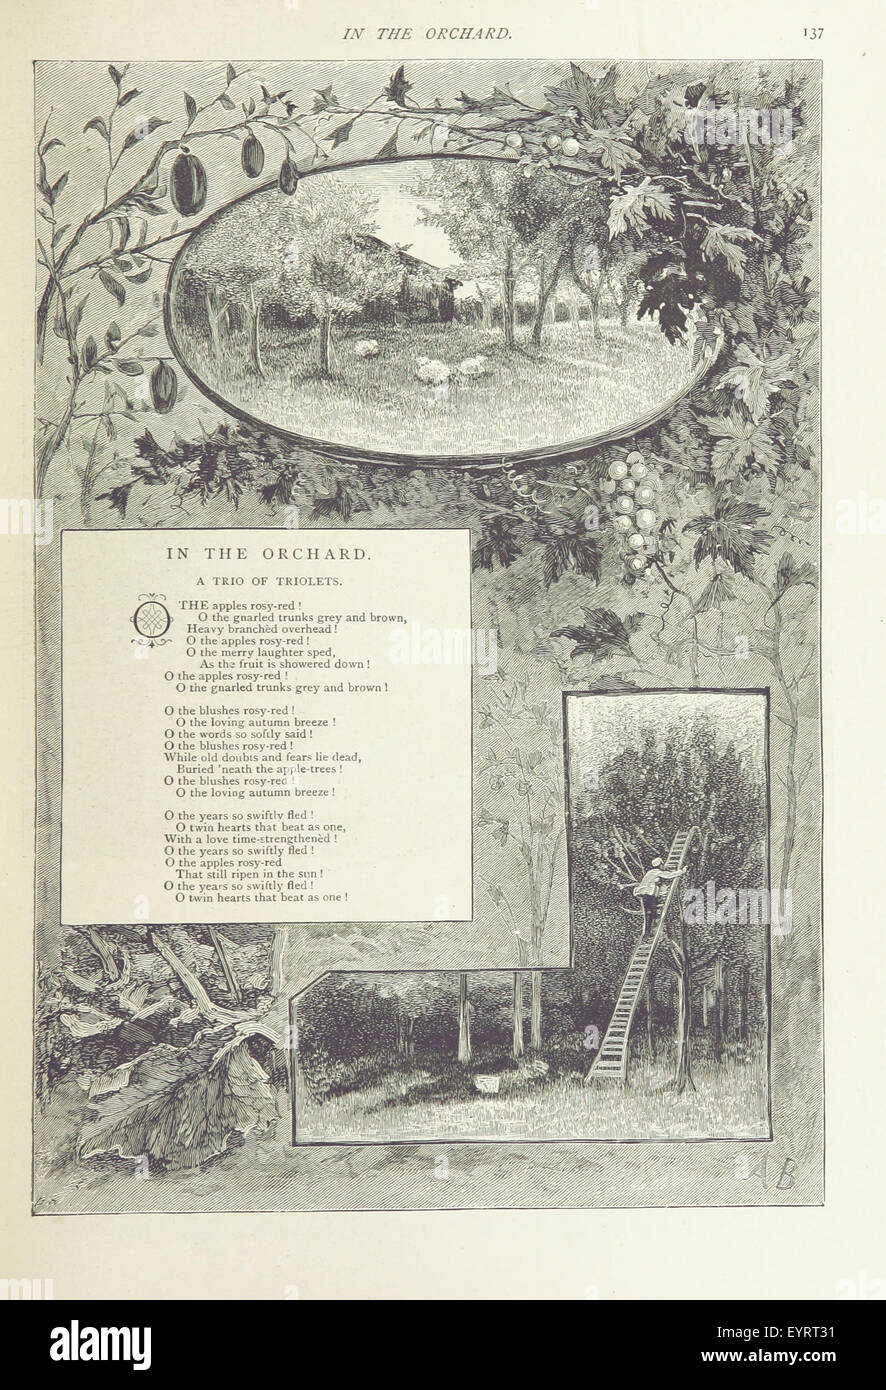 The Changing Year: being poems and pictures of life and nature. Illustrations by A. Barraud, etc Image taken from page 143 of 'The Changing Year being Stock Photo